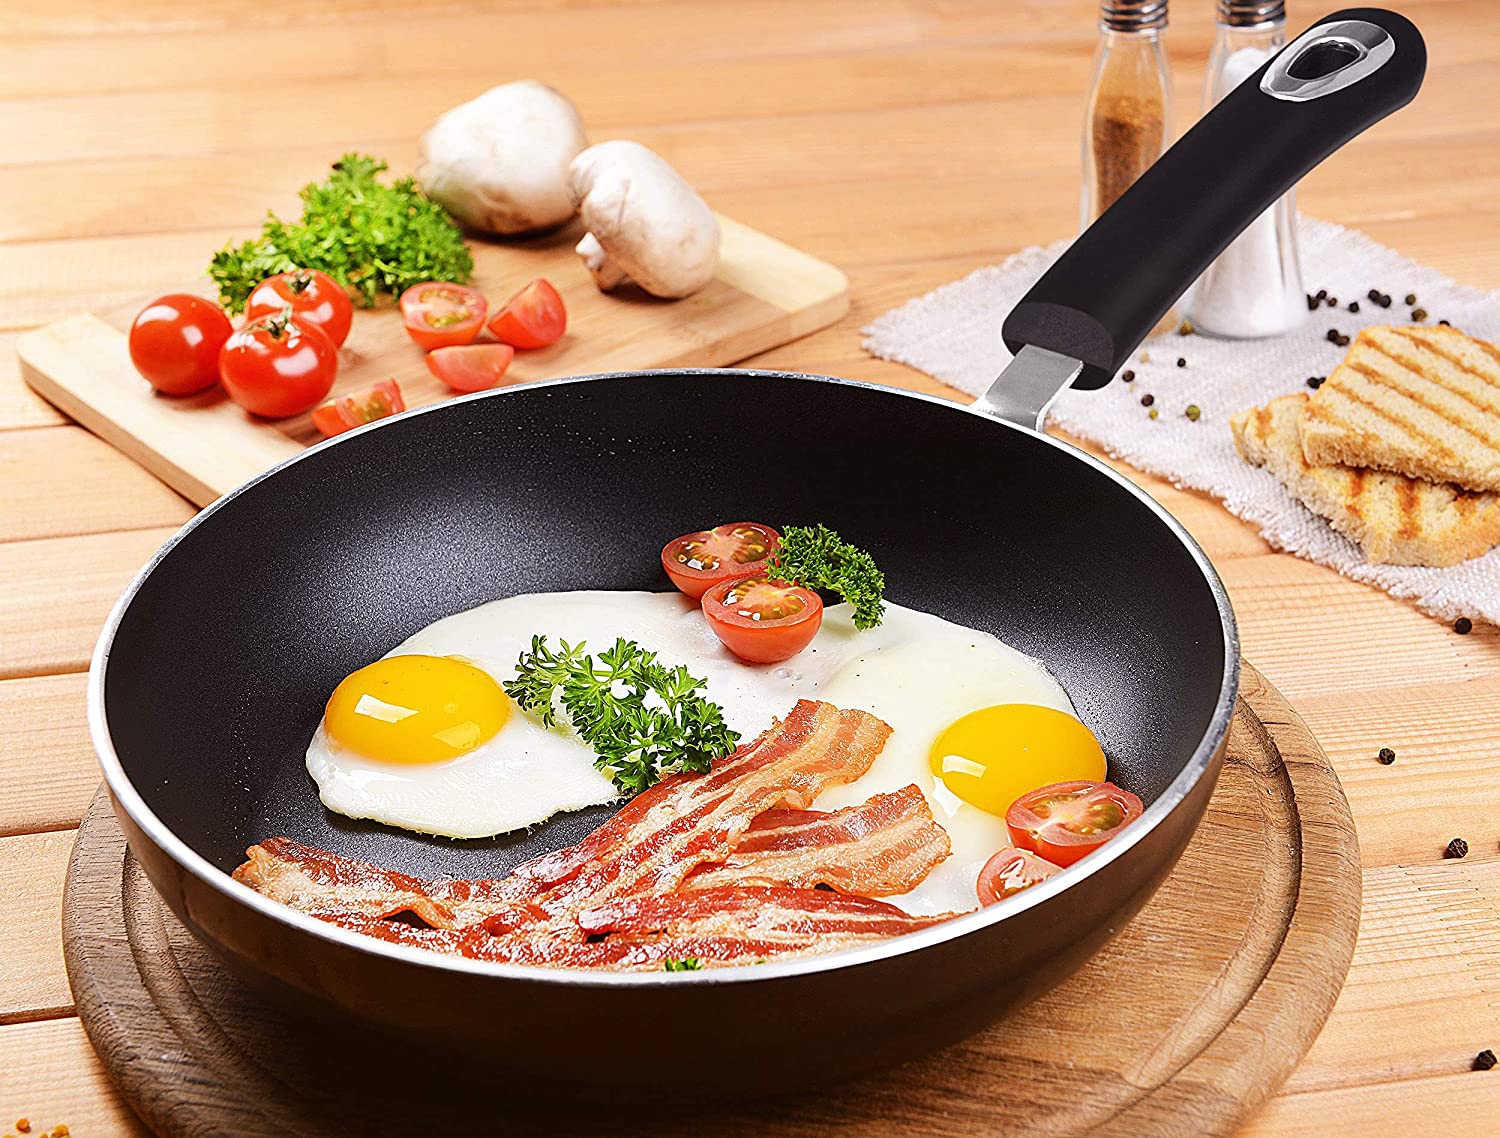 Non-stick Frying Pan Set - 3 Pieces (8 Inch / 9.5 Inch / 11 Inch) by U –  Utopia Deals